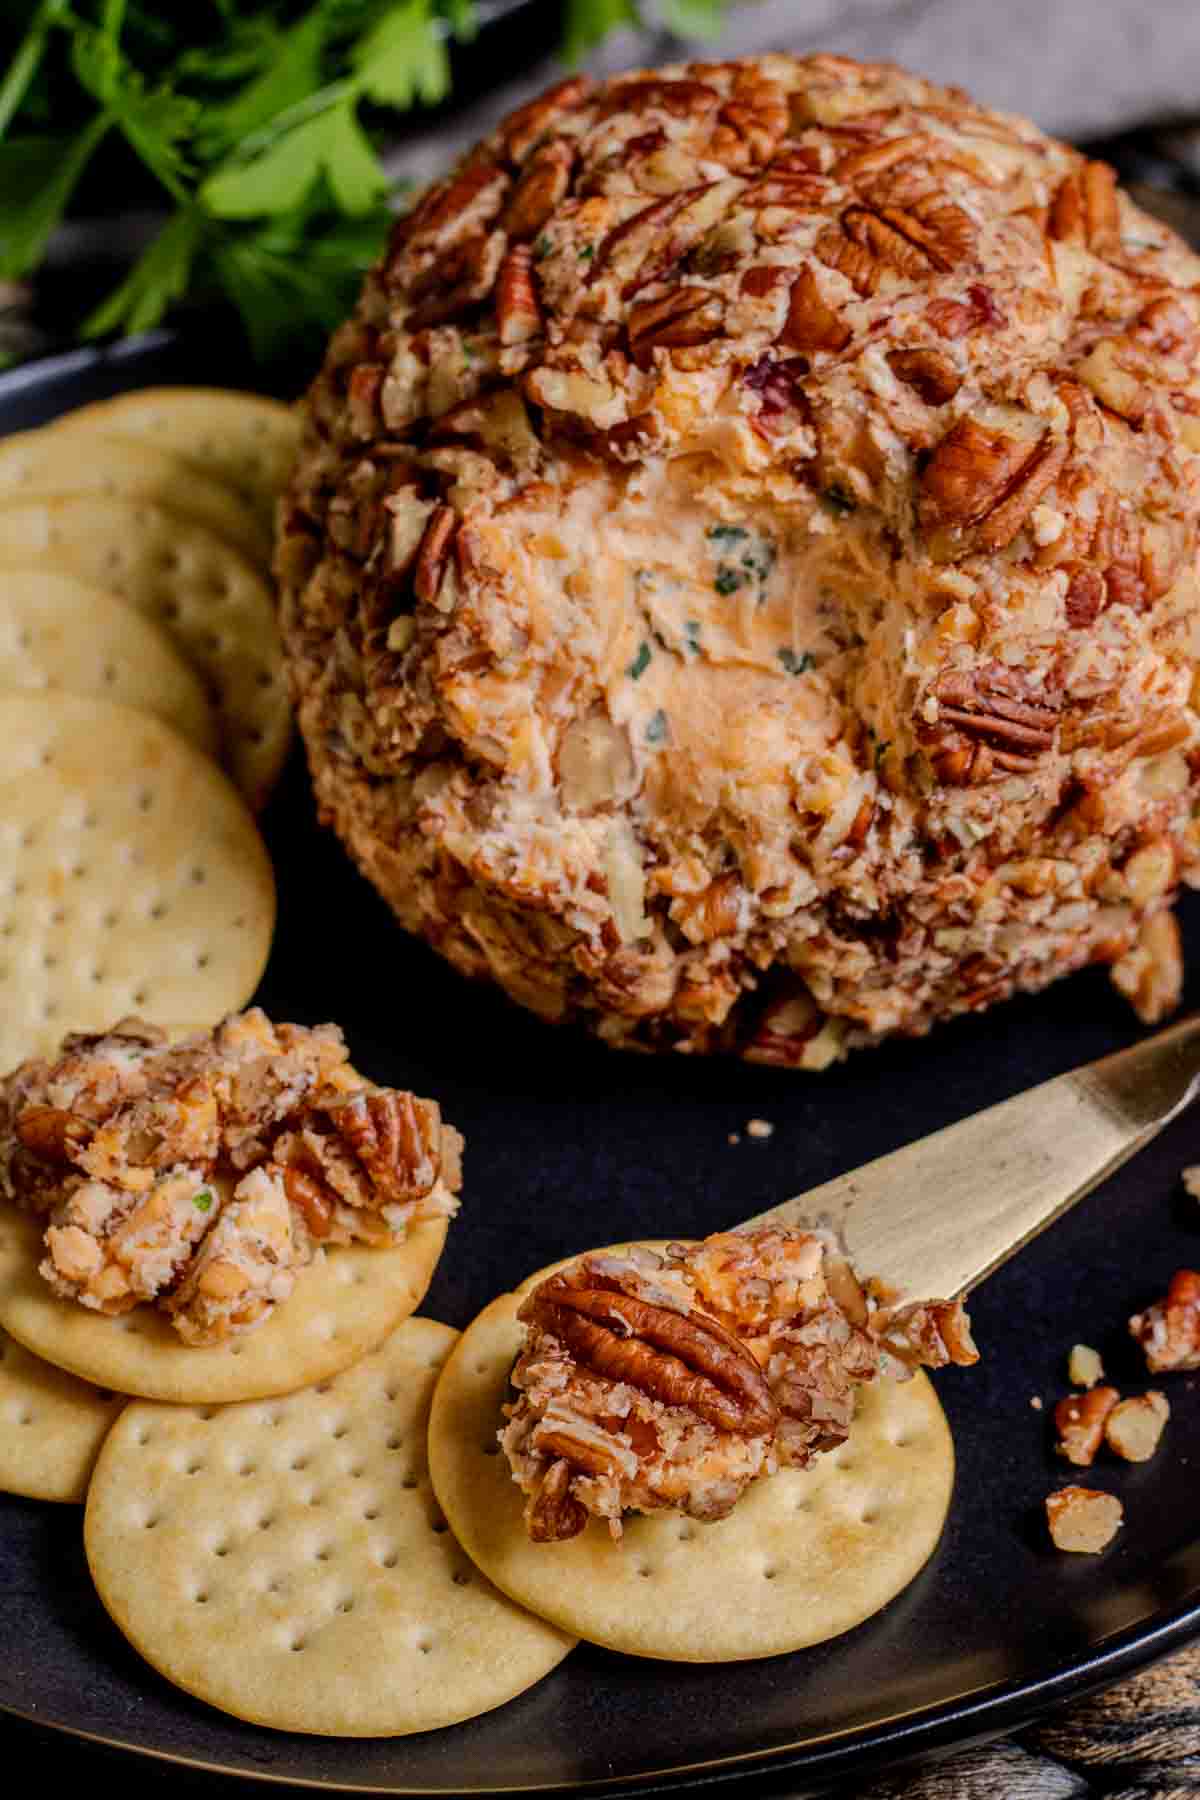 A cheese ball with pecans and crackers on a plate.